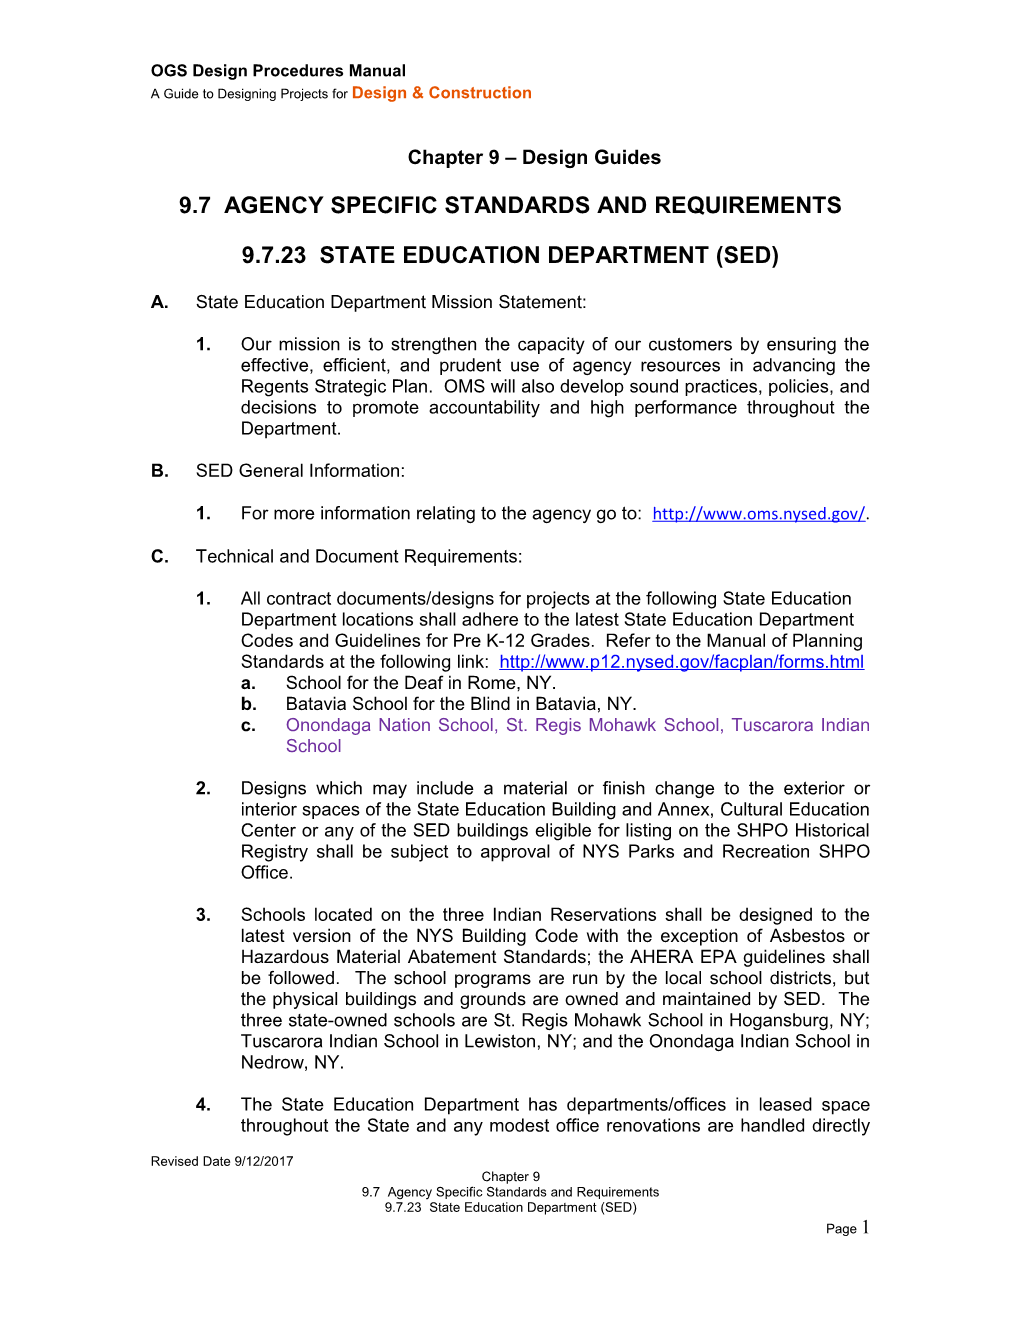 9.7 Agency Specific Standards and Requirements